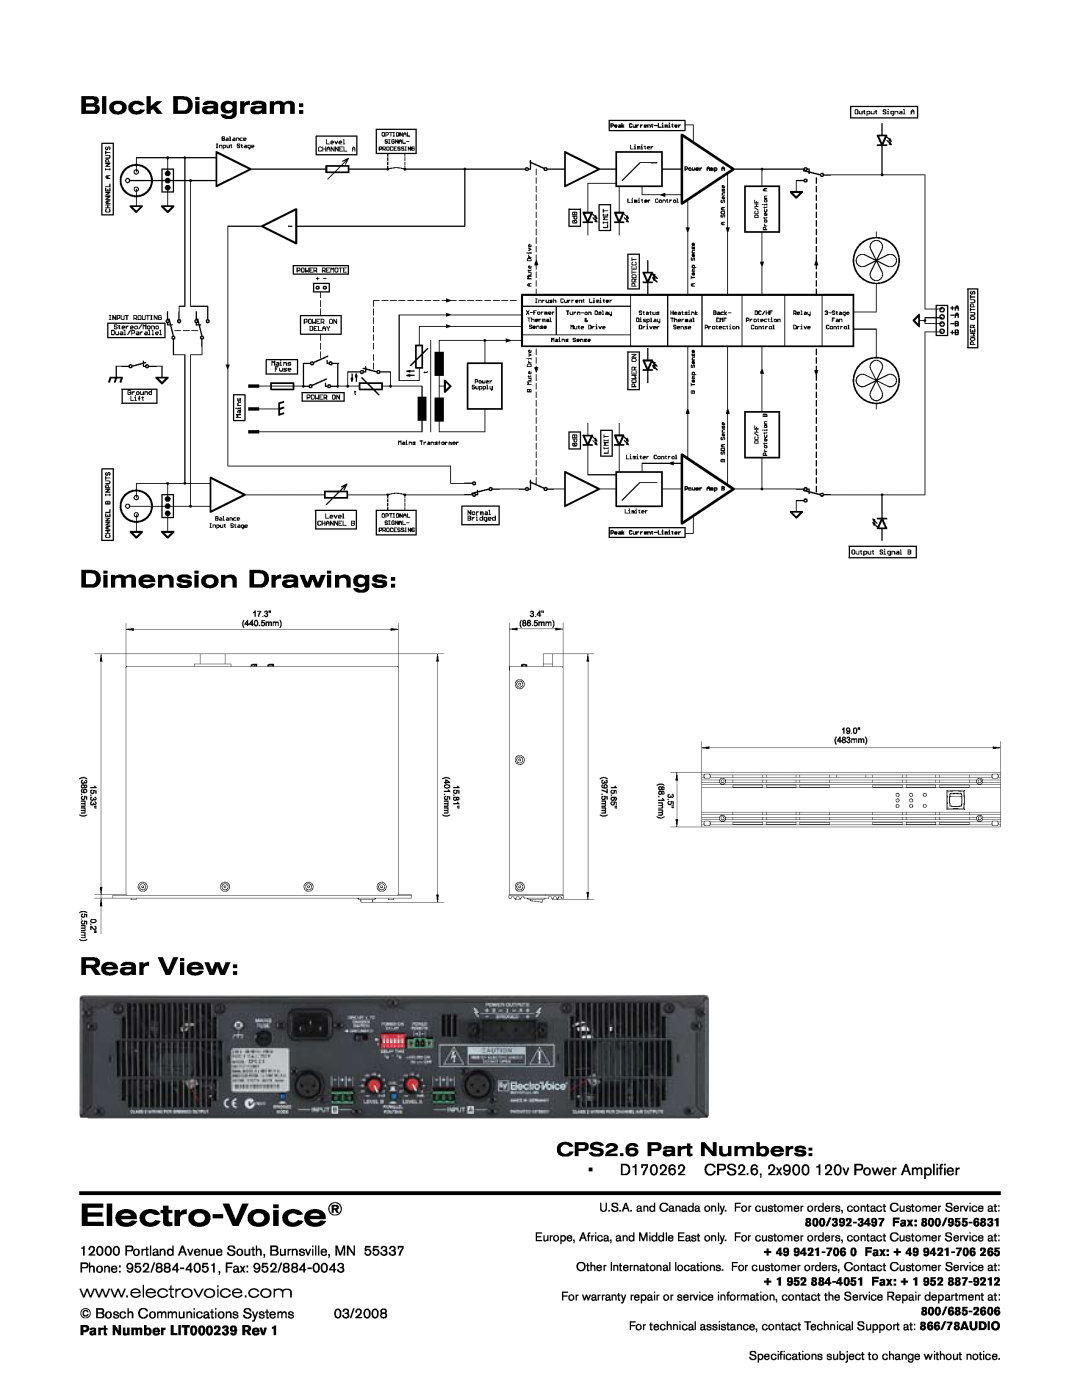 Electro-Voice CPS 2.6 Block Diagram Dimension Drawings Rear View, CPS2.6 Part Numbers, Electro-Voice 